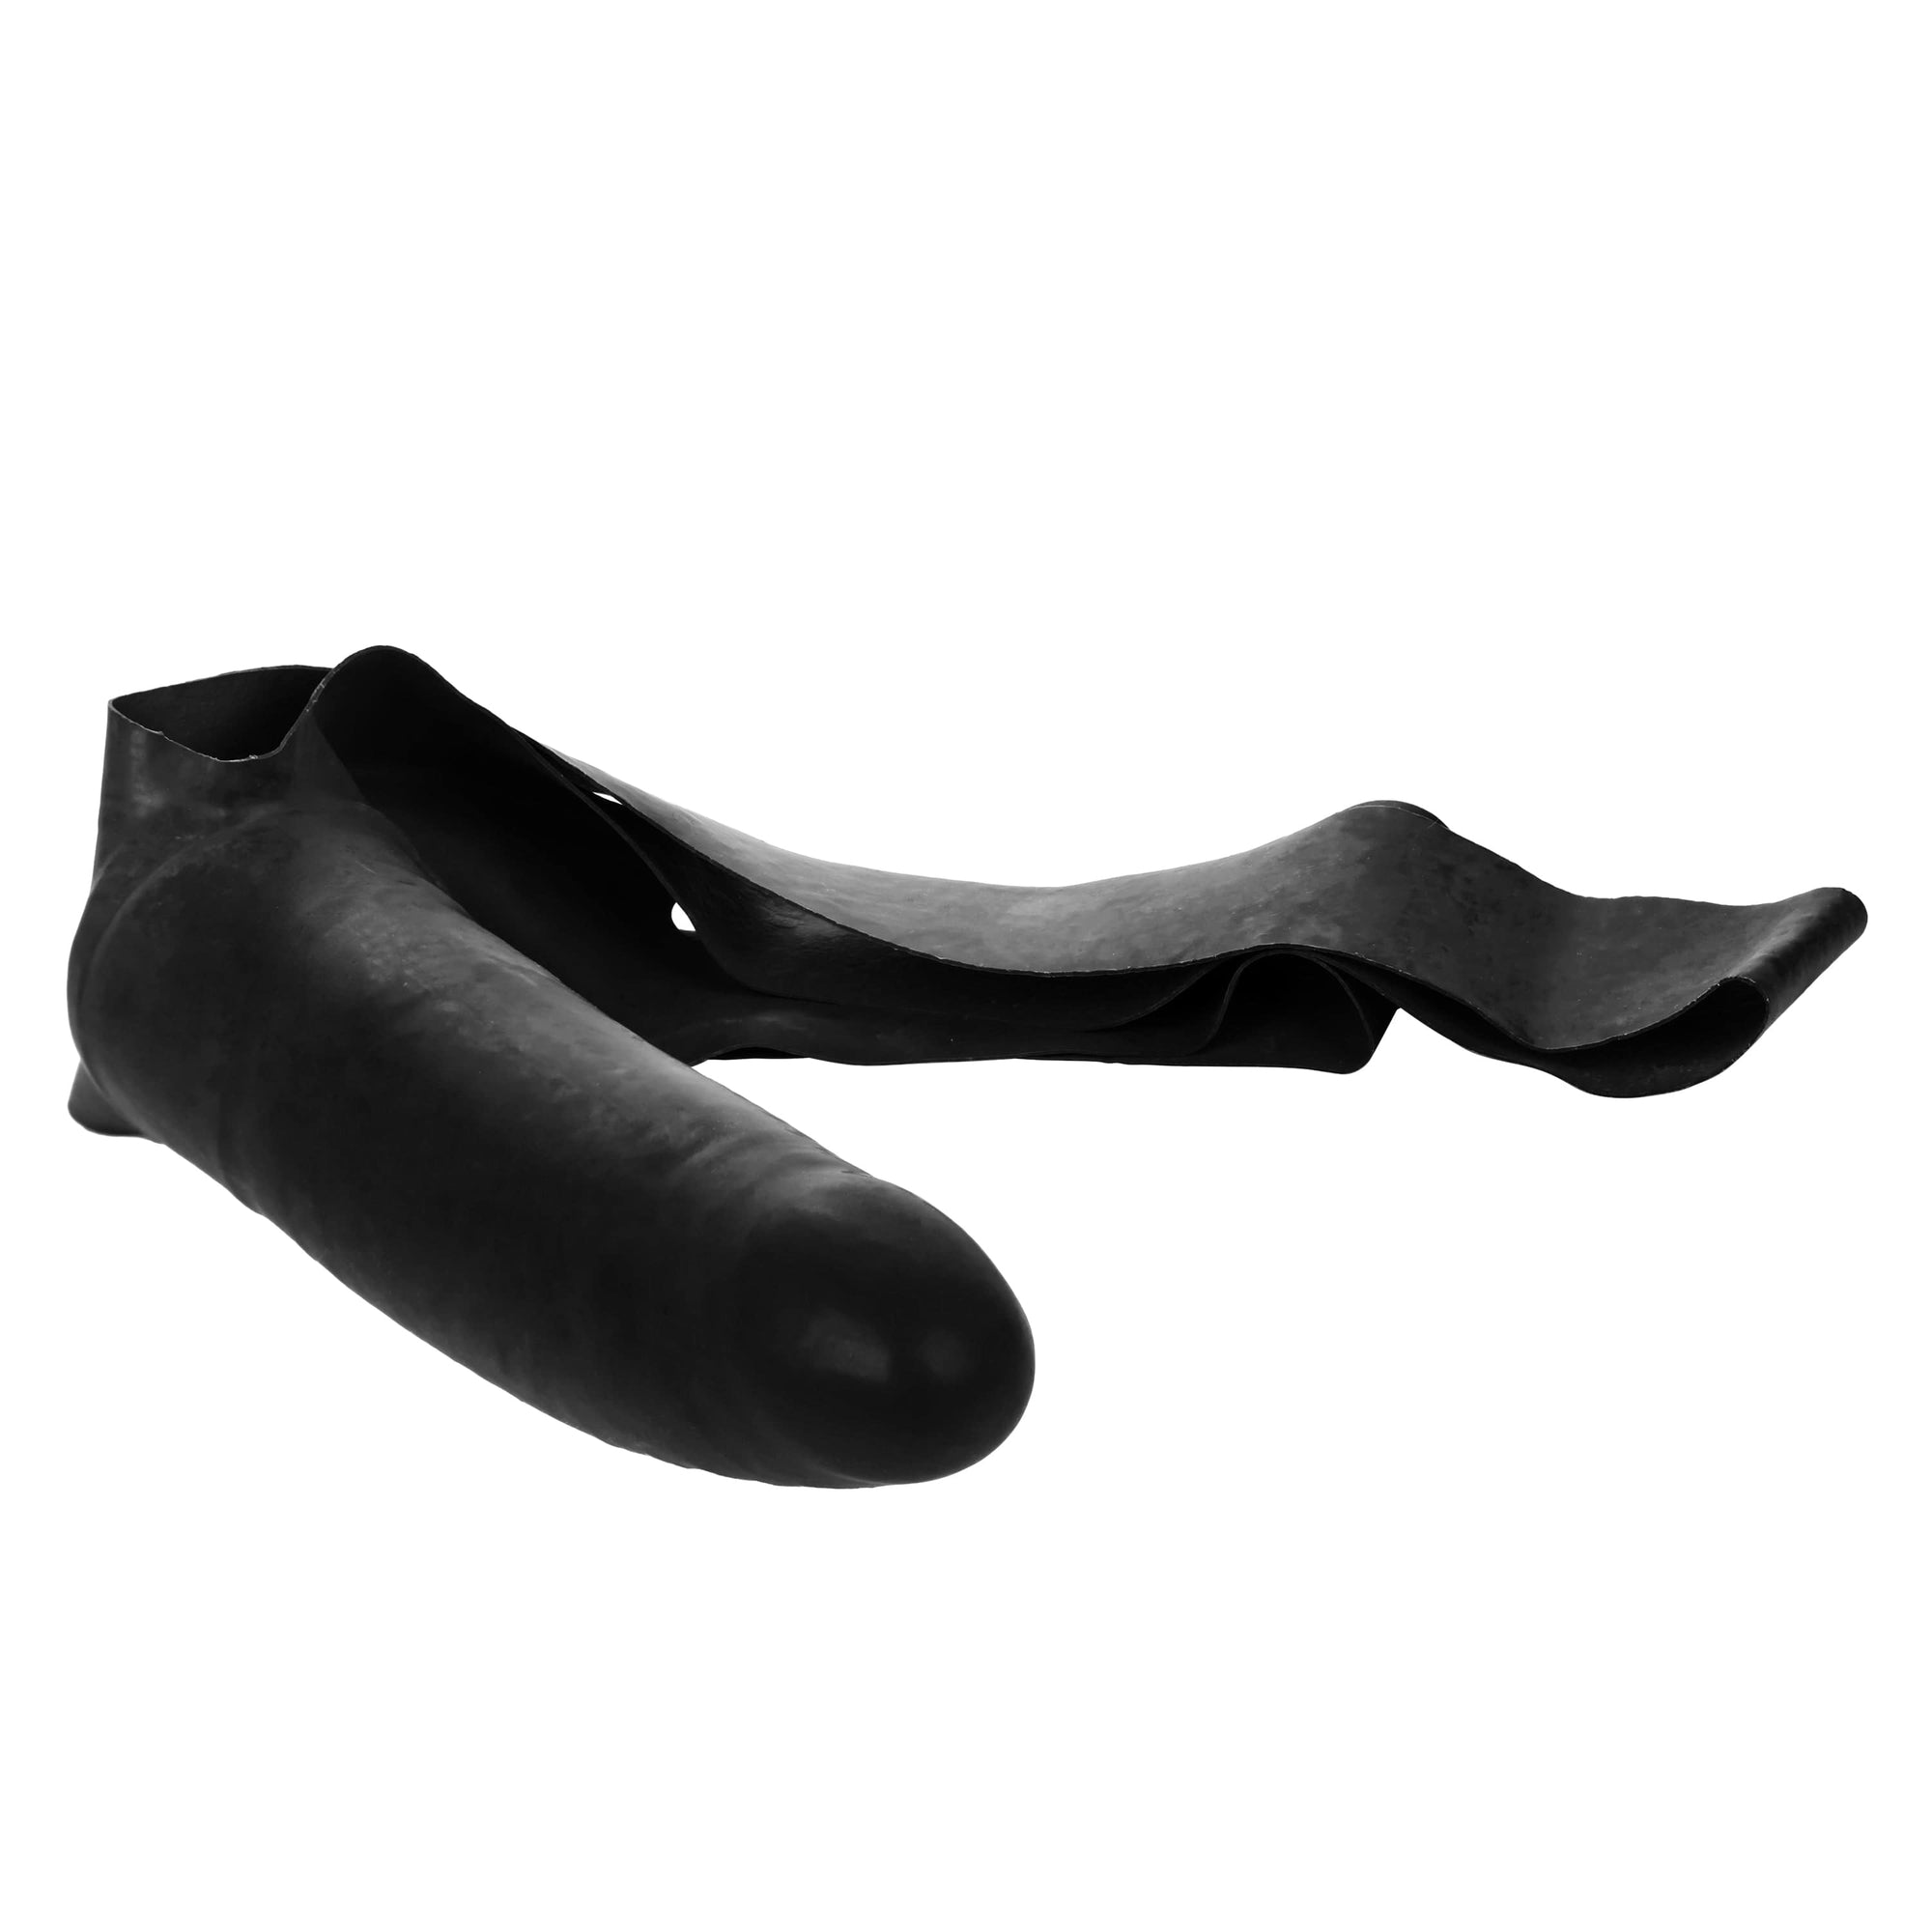 California Exotics - The Original Accommodator Latex Dong Mouth Strap On (Black) -  Strap On with Non hollow Dildo for Female (Non Vibration)  Durio.sg